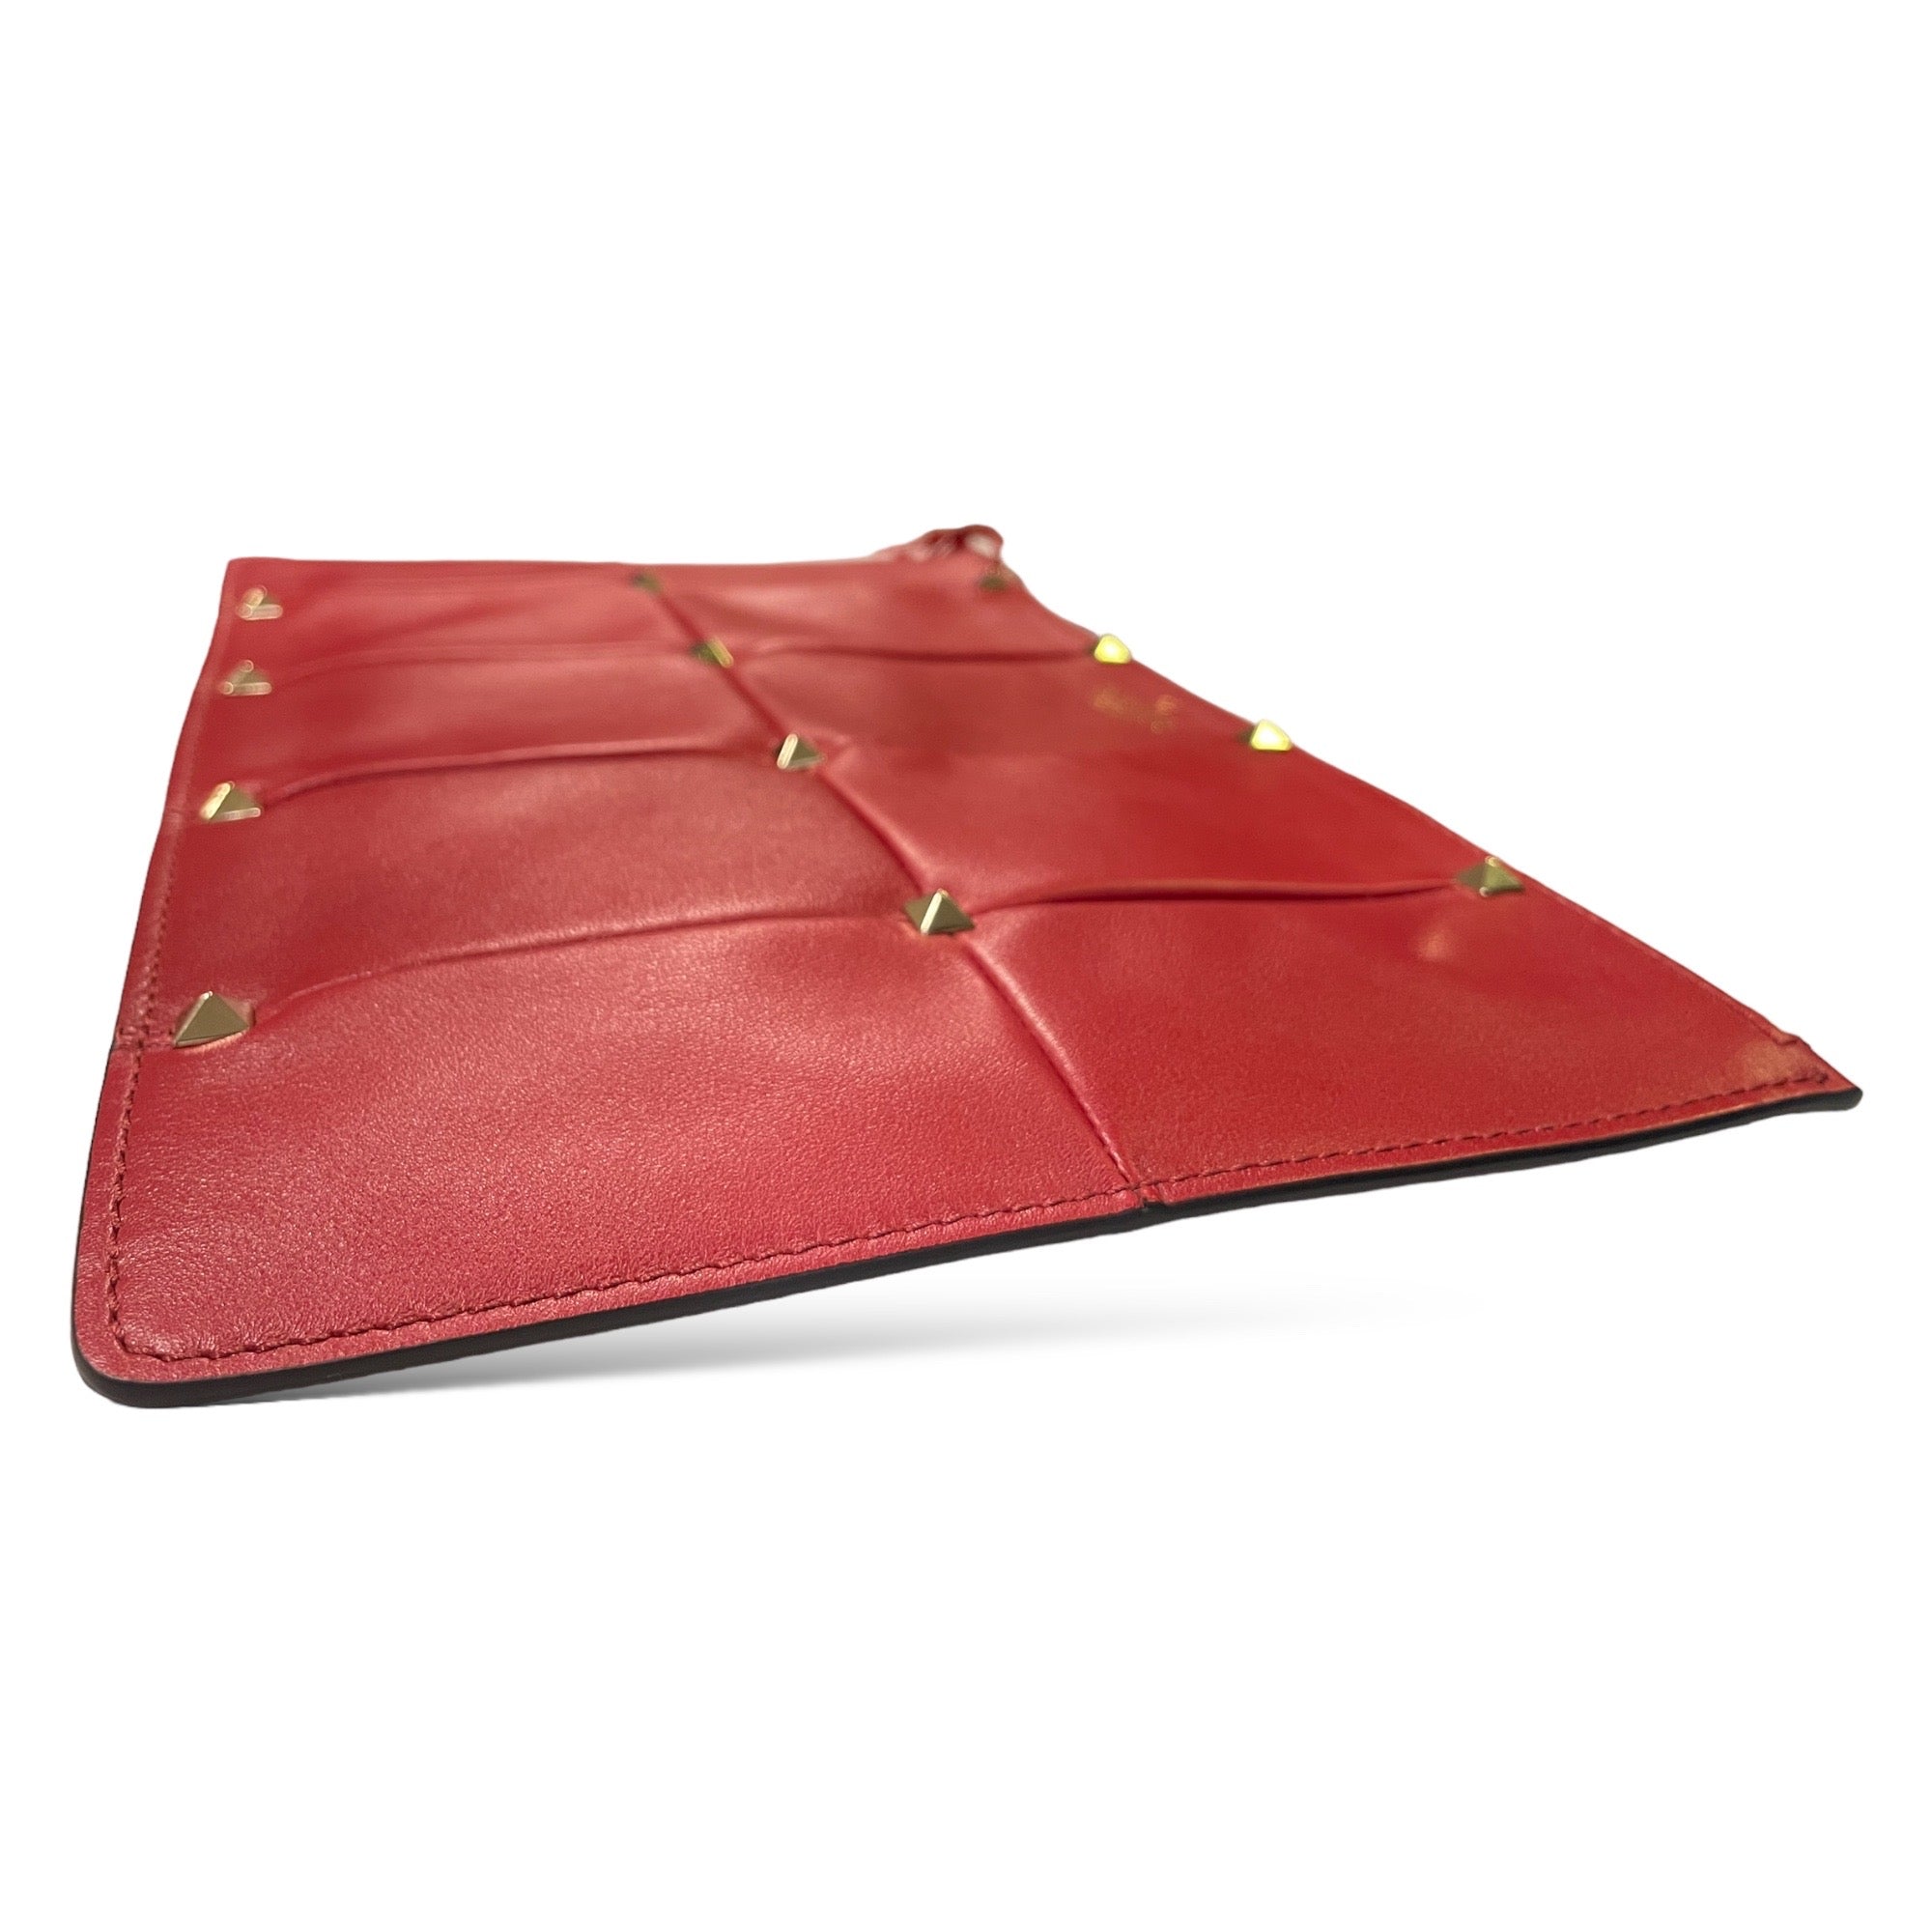 VALENTINO GARAVANI Red Quilted Leather with Gold Stud Accents Clutch NWT